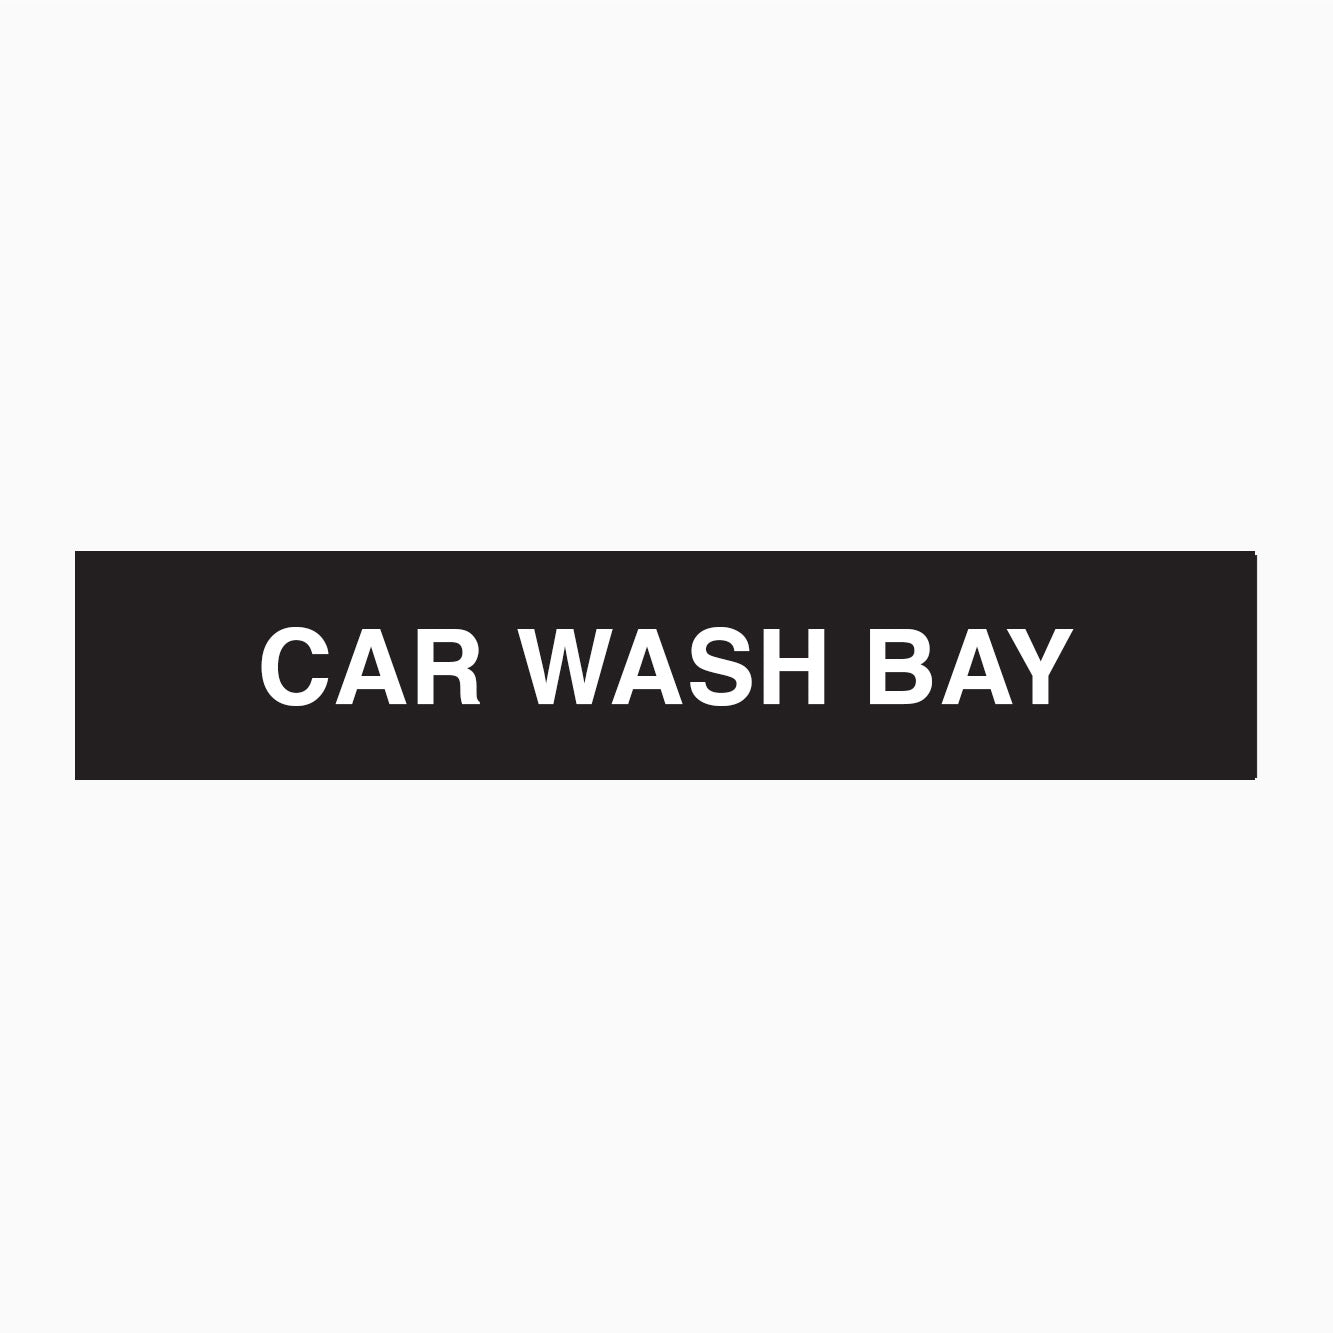 CAR WASH BAY SIGN - STATUTORY SIGNS AT GET SIGNS IN AUSTRALIA